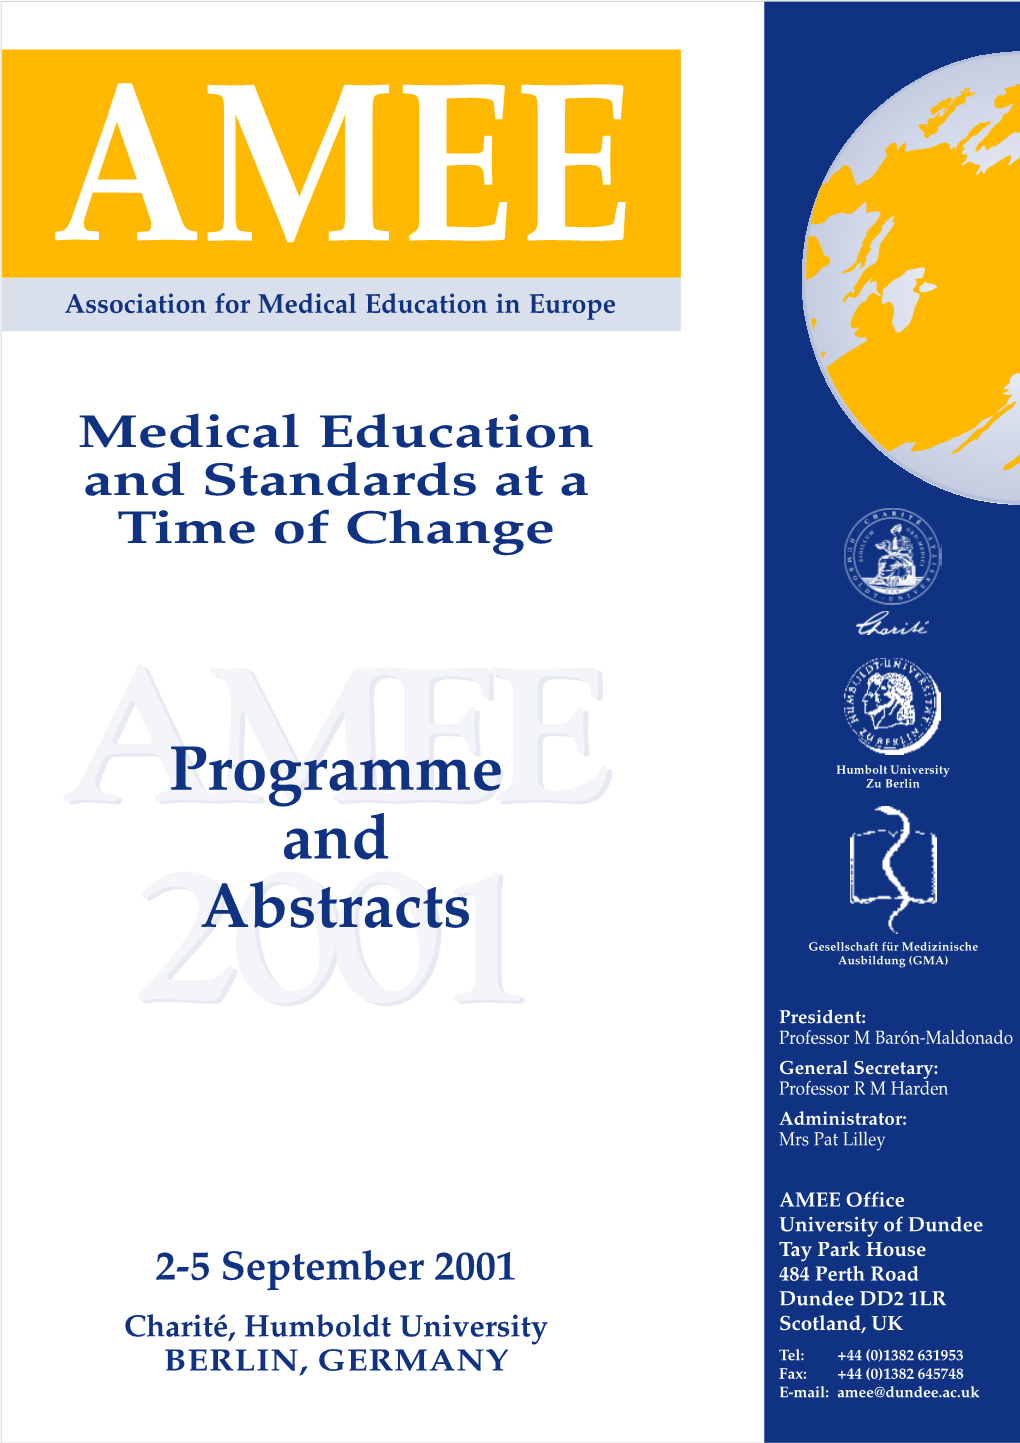 AMEE 2001 Programme and Abstracts